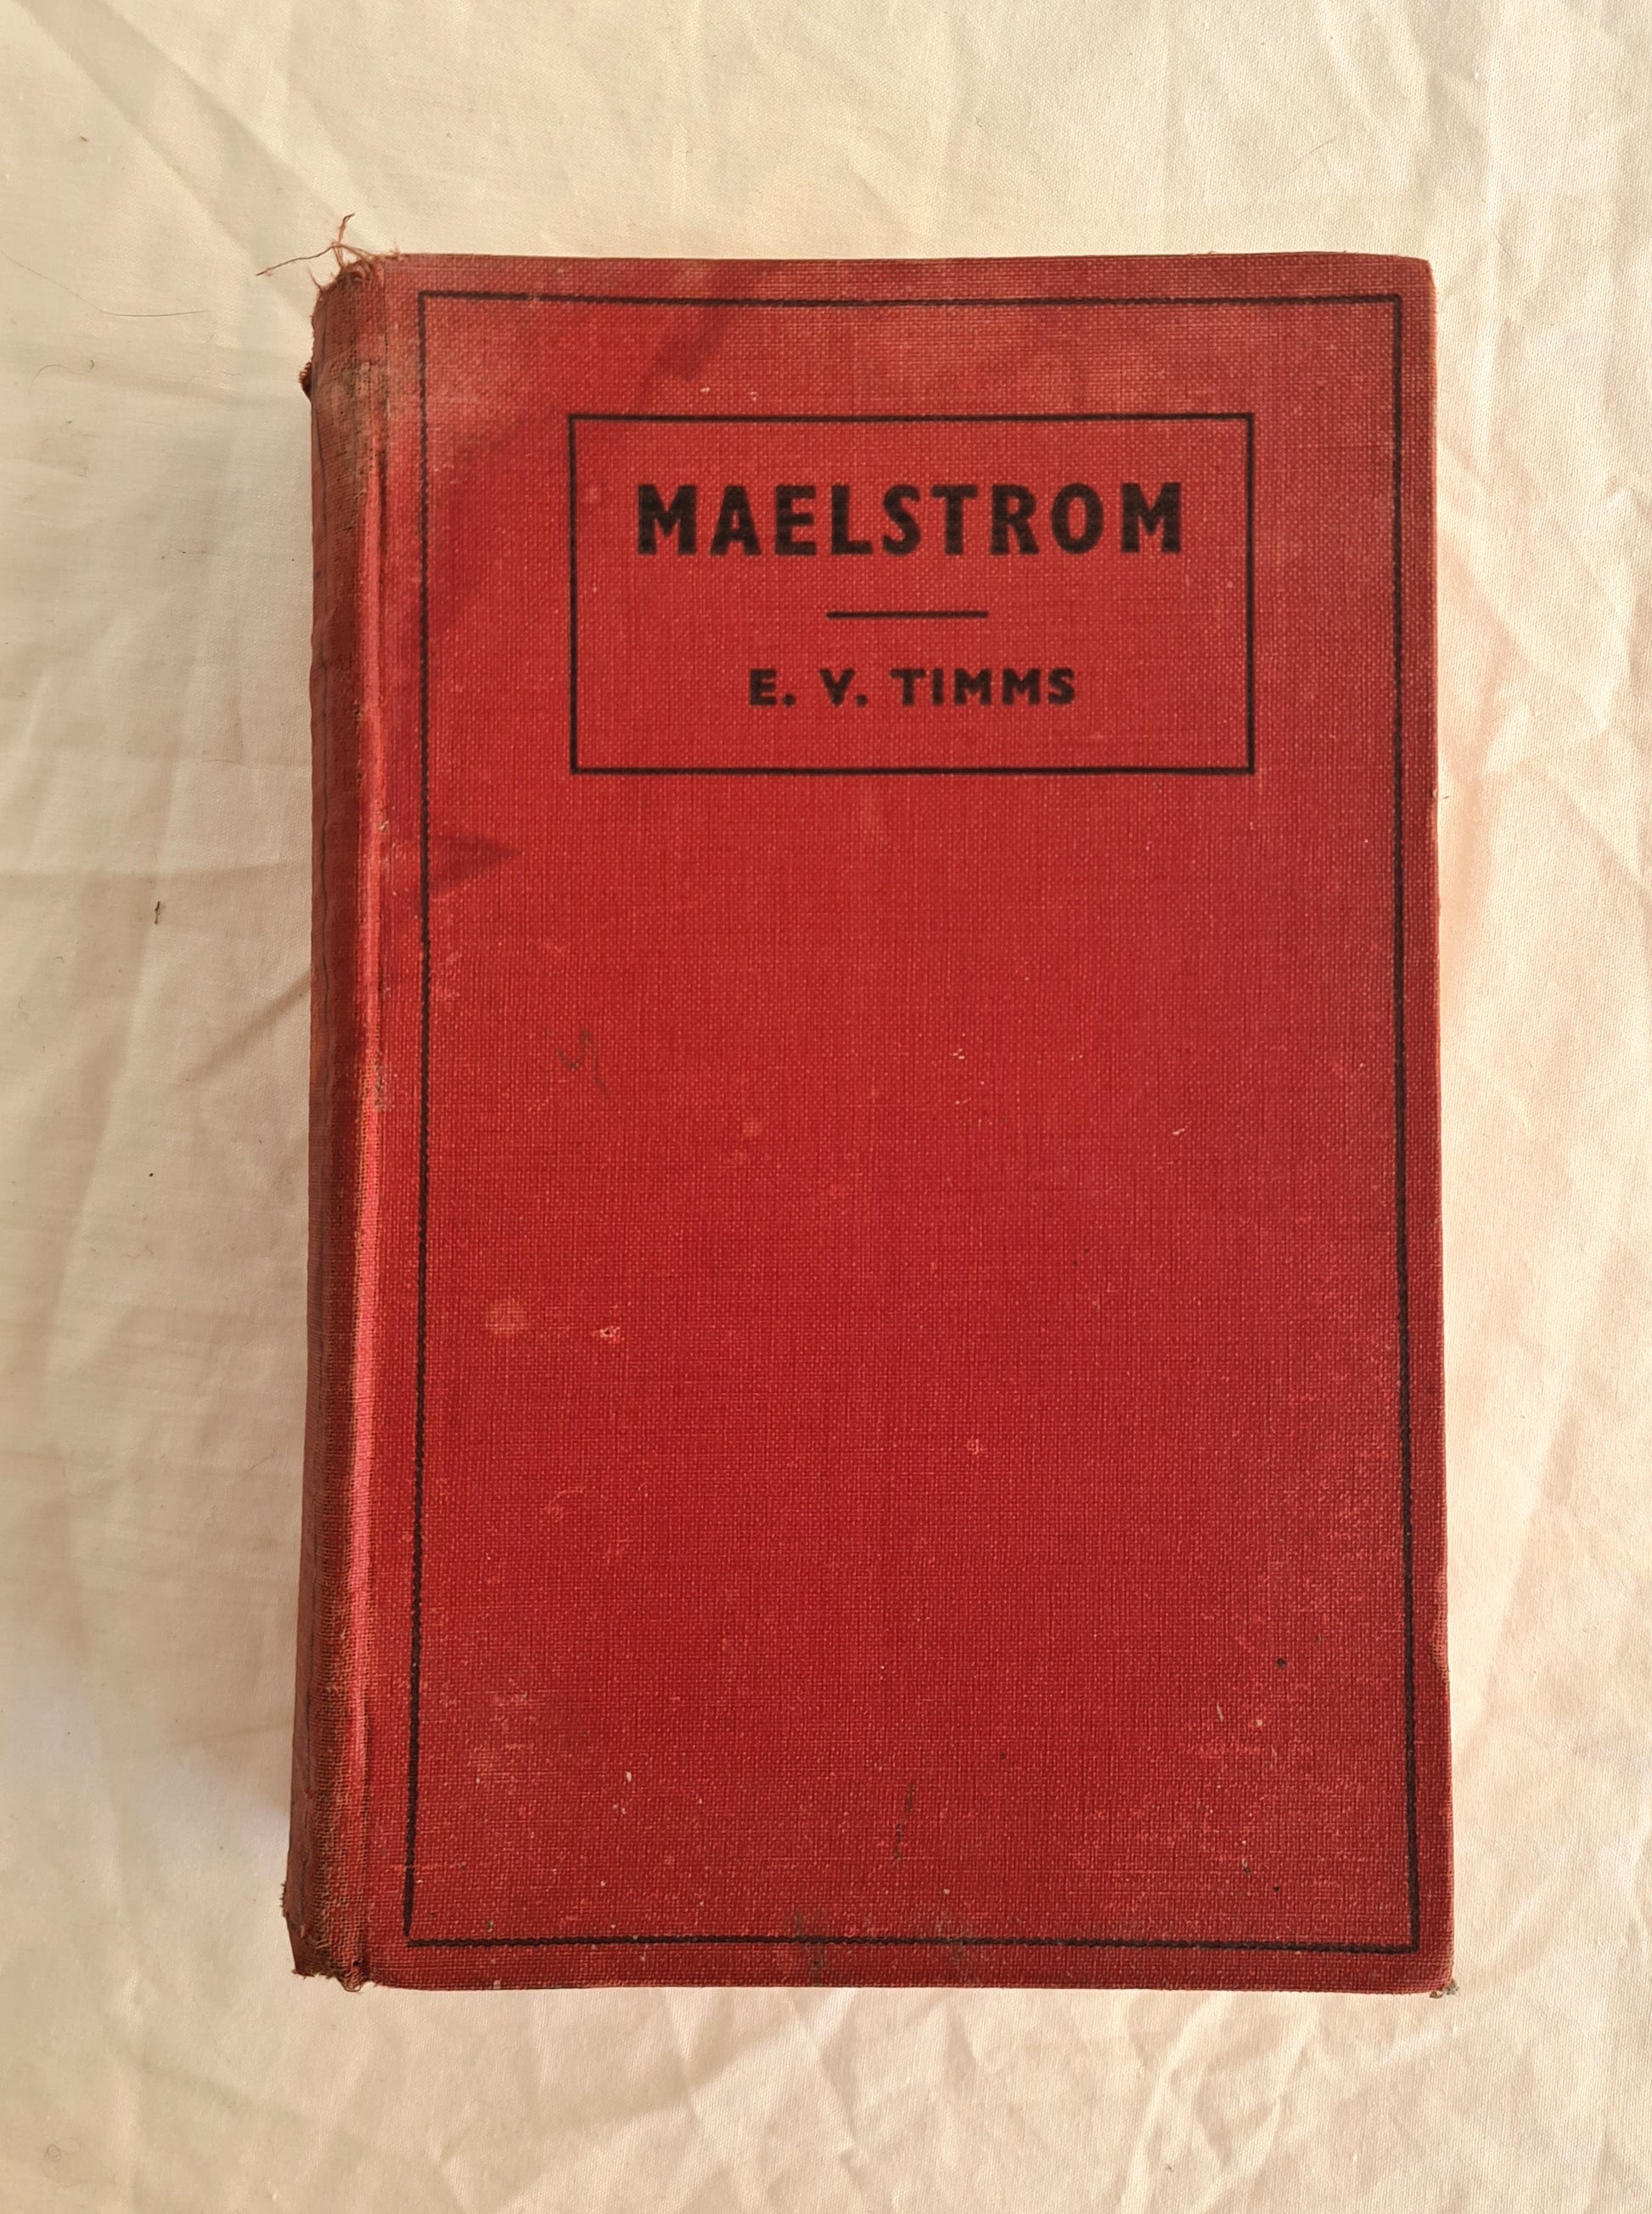 Maelstrom by E. V. Timms